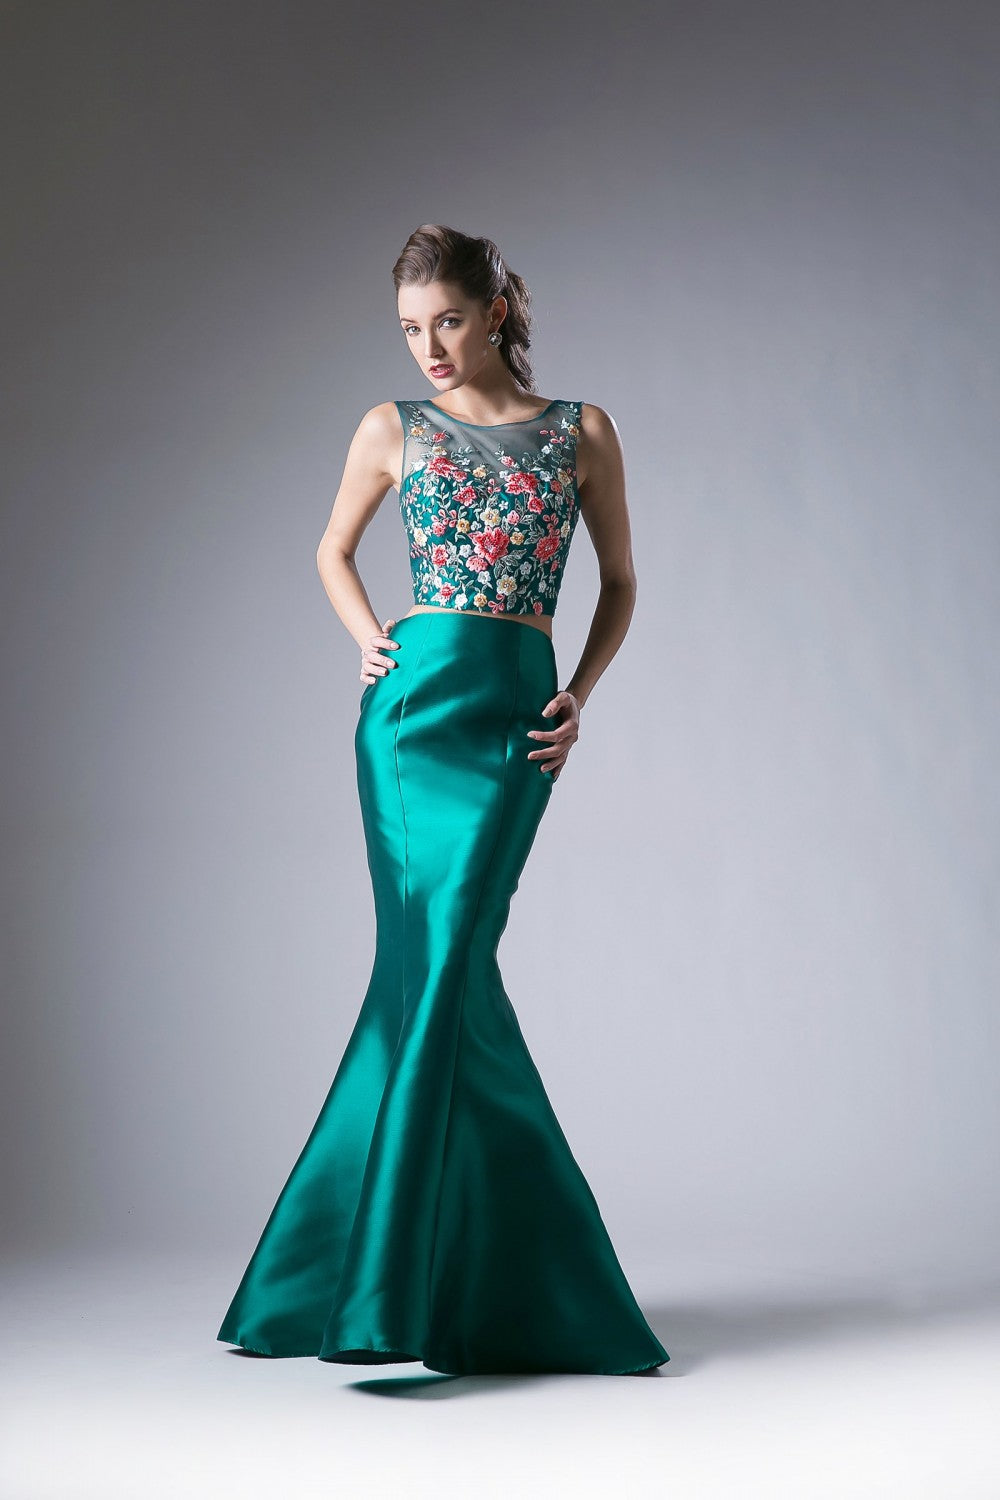 Flower Applique 2 Piece Mermaid Long Prom Gown CDHW03 Elsy Style Prom Dress